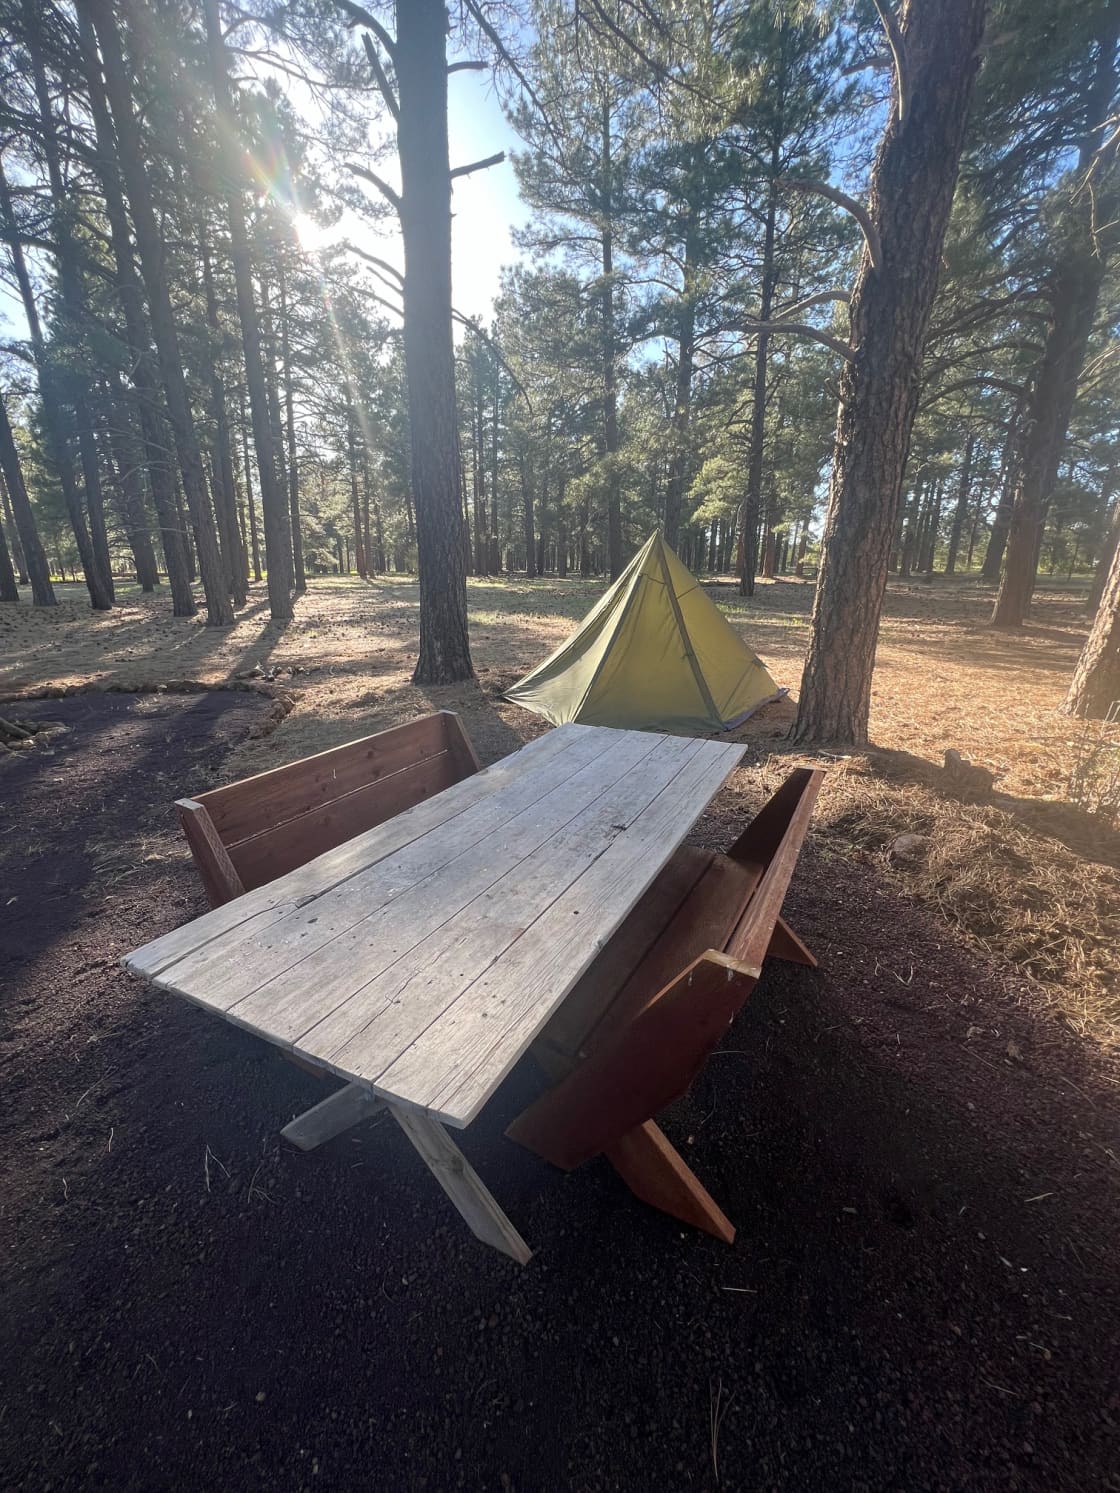 Picnic table and benches at your site. Nice flat place for setting up your tent. 